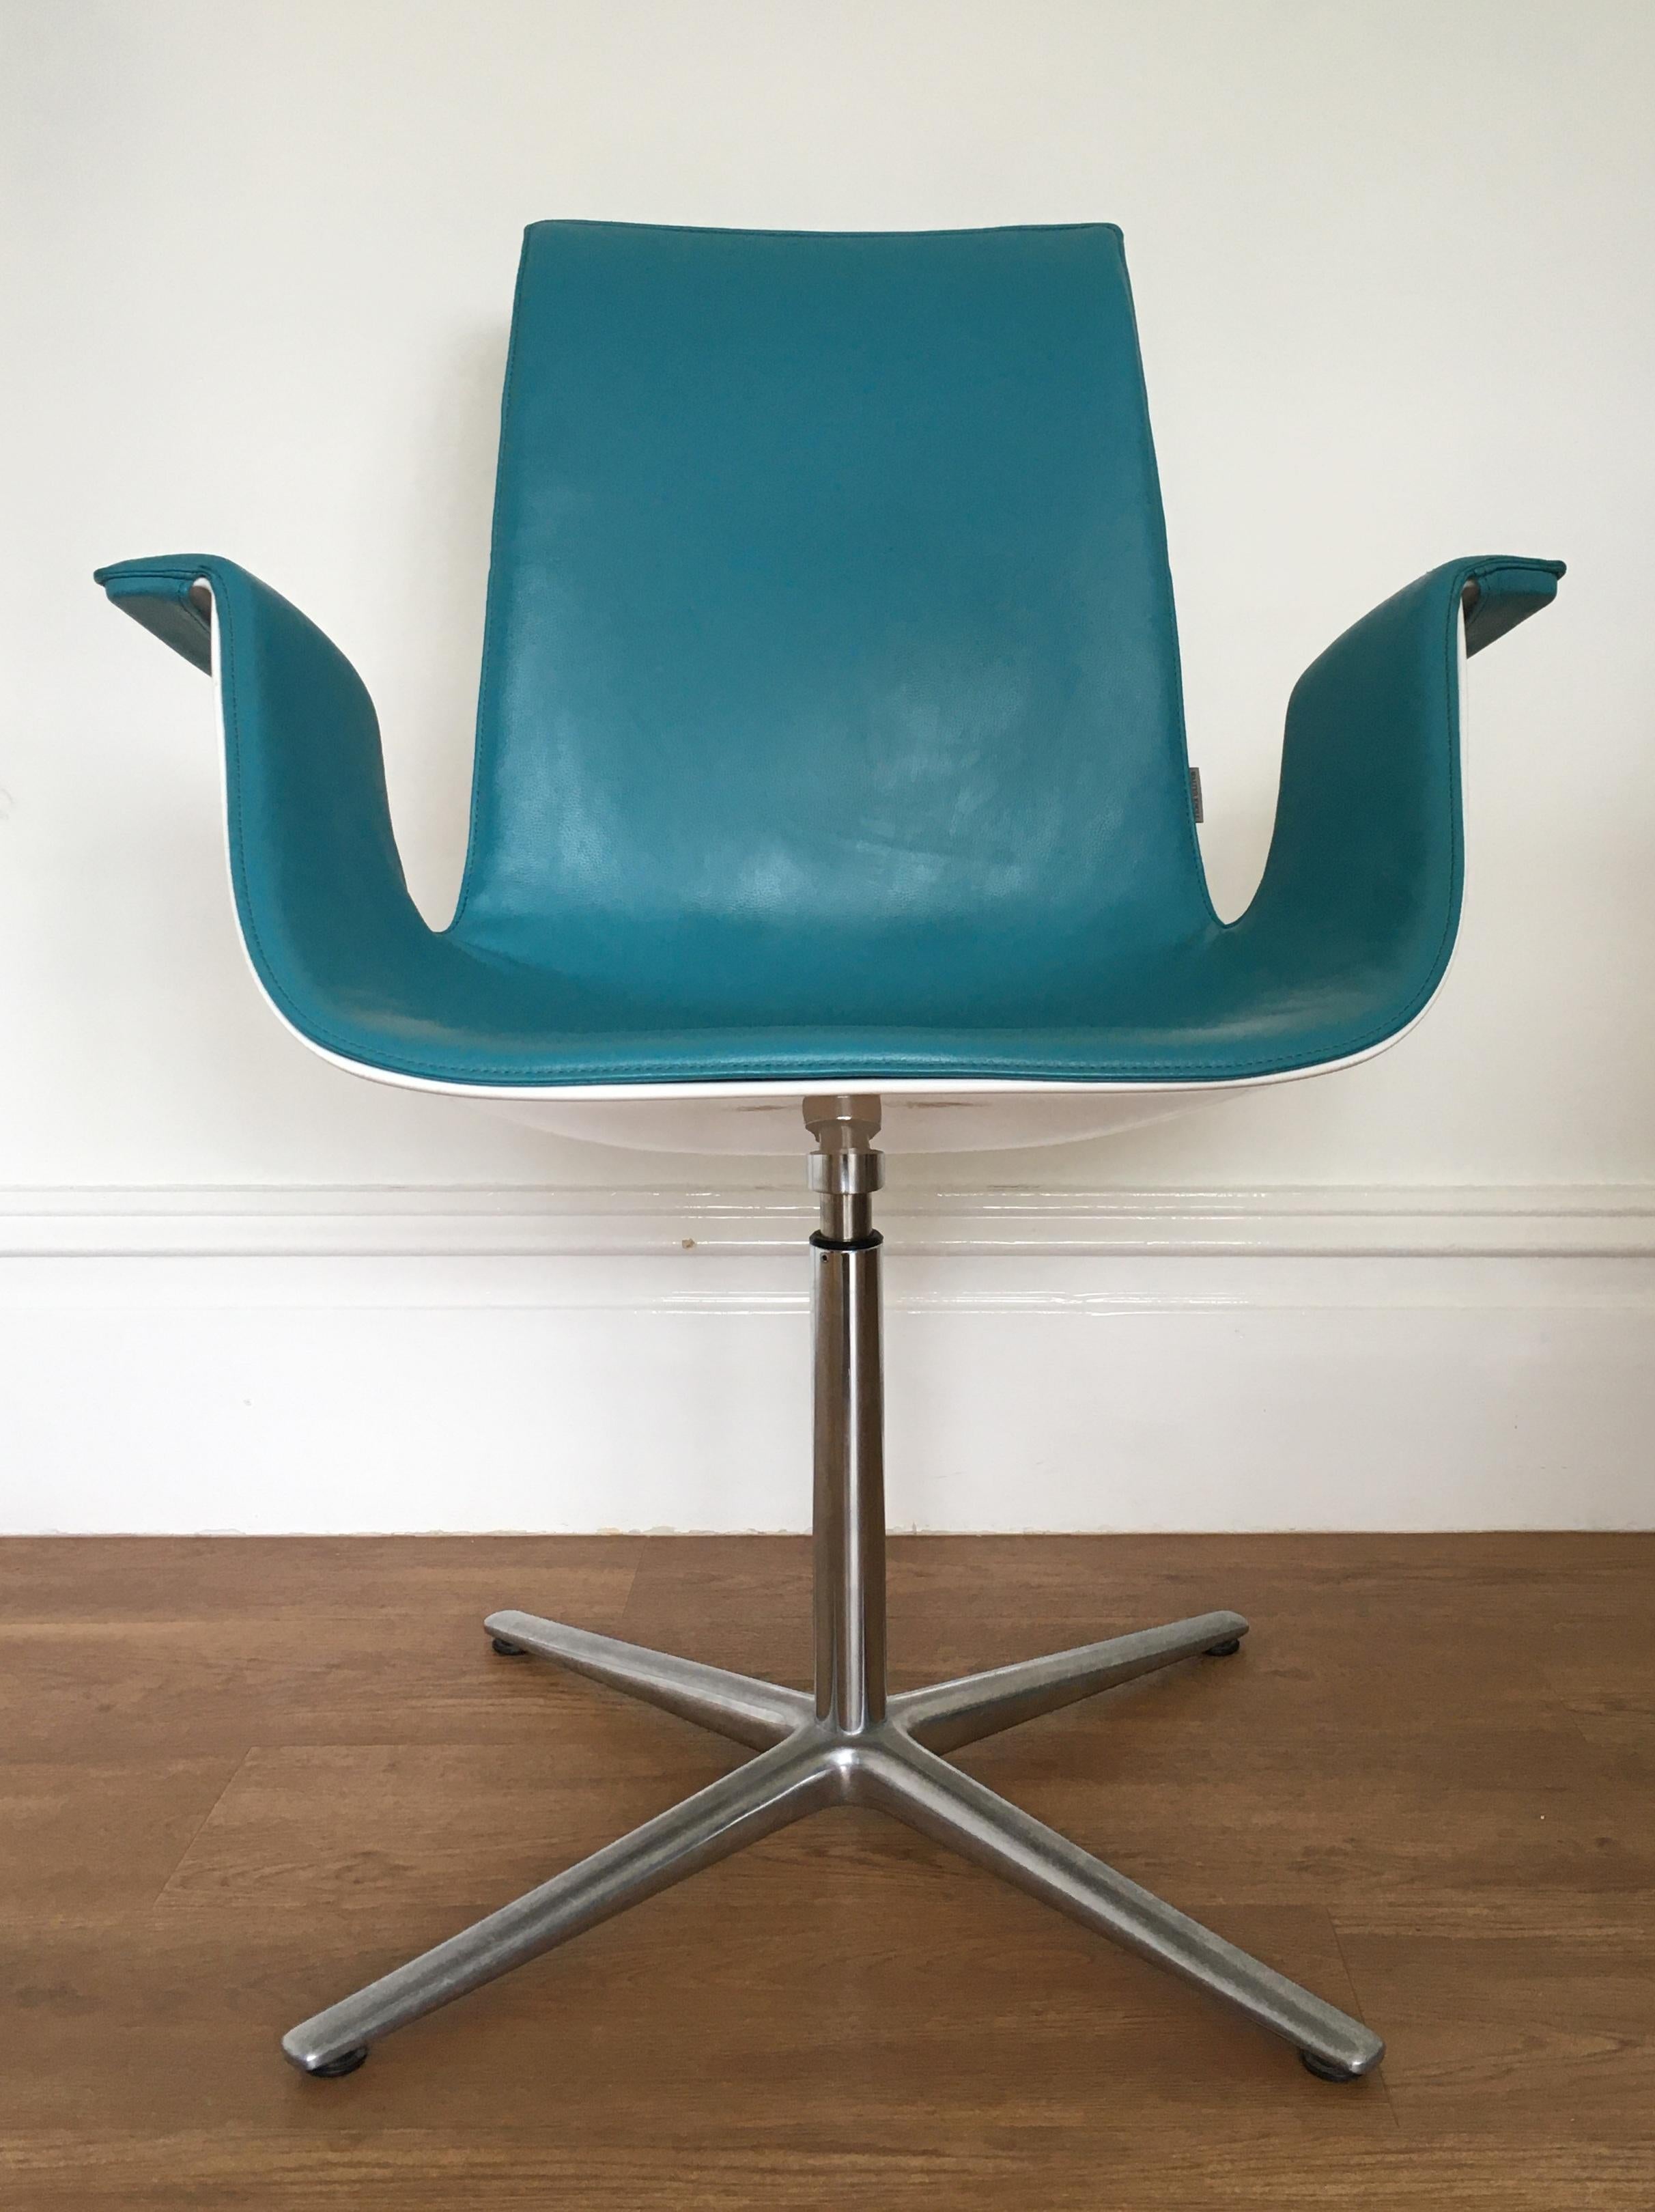 Originally designed in 1967 by Fabricius and Kastholm the FK bucket chair (also known as the bird chair) is one of the iconic, instantly recognisable, designs from the mid 20th century.

The chair features turquoise leaher upholstery with a white